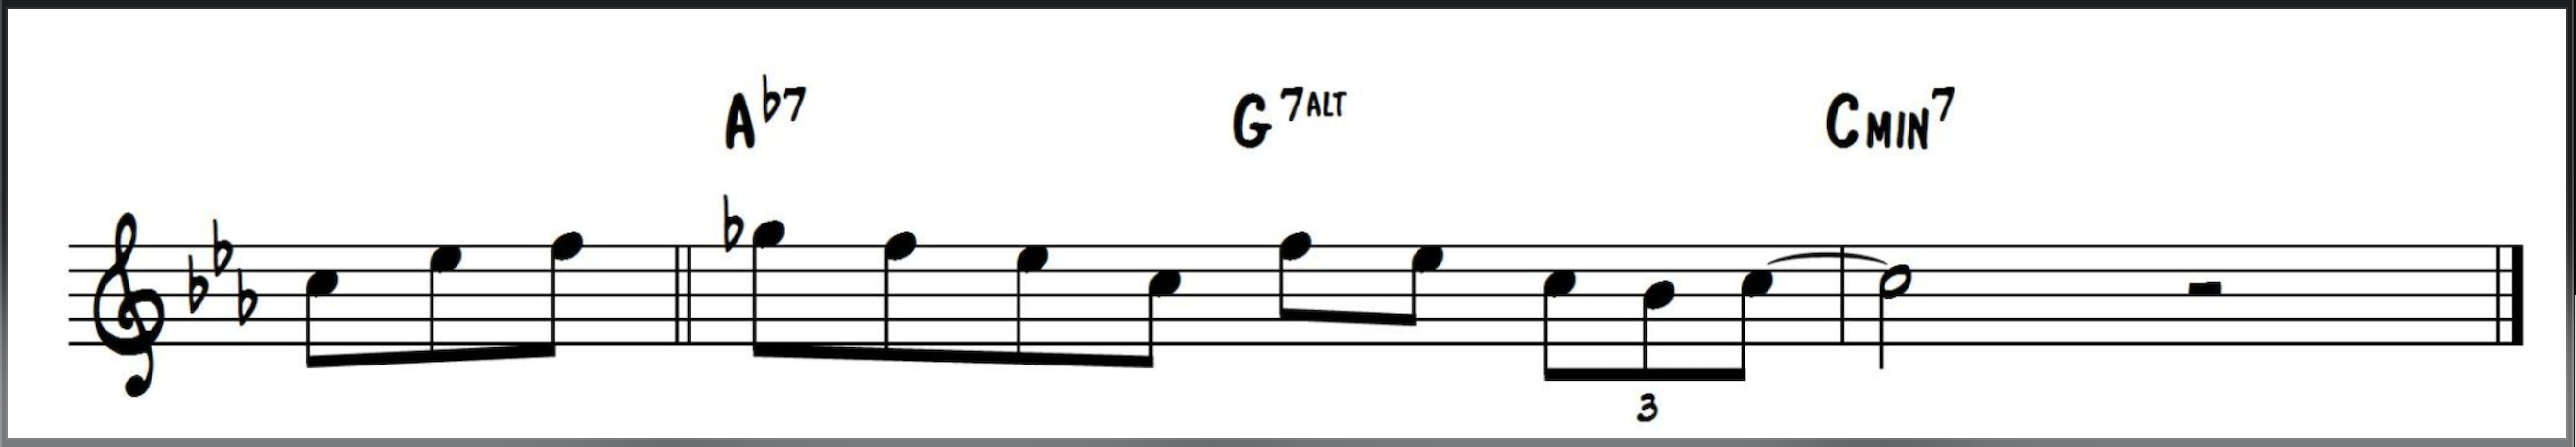 Blues Lick using a tritone substitution over an Ab7 chord